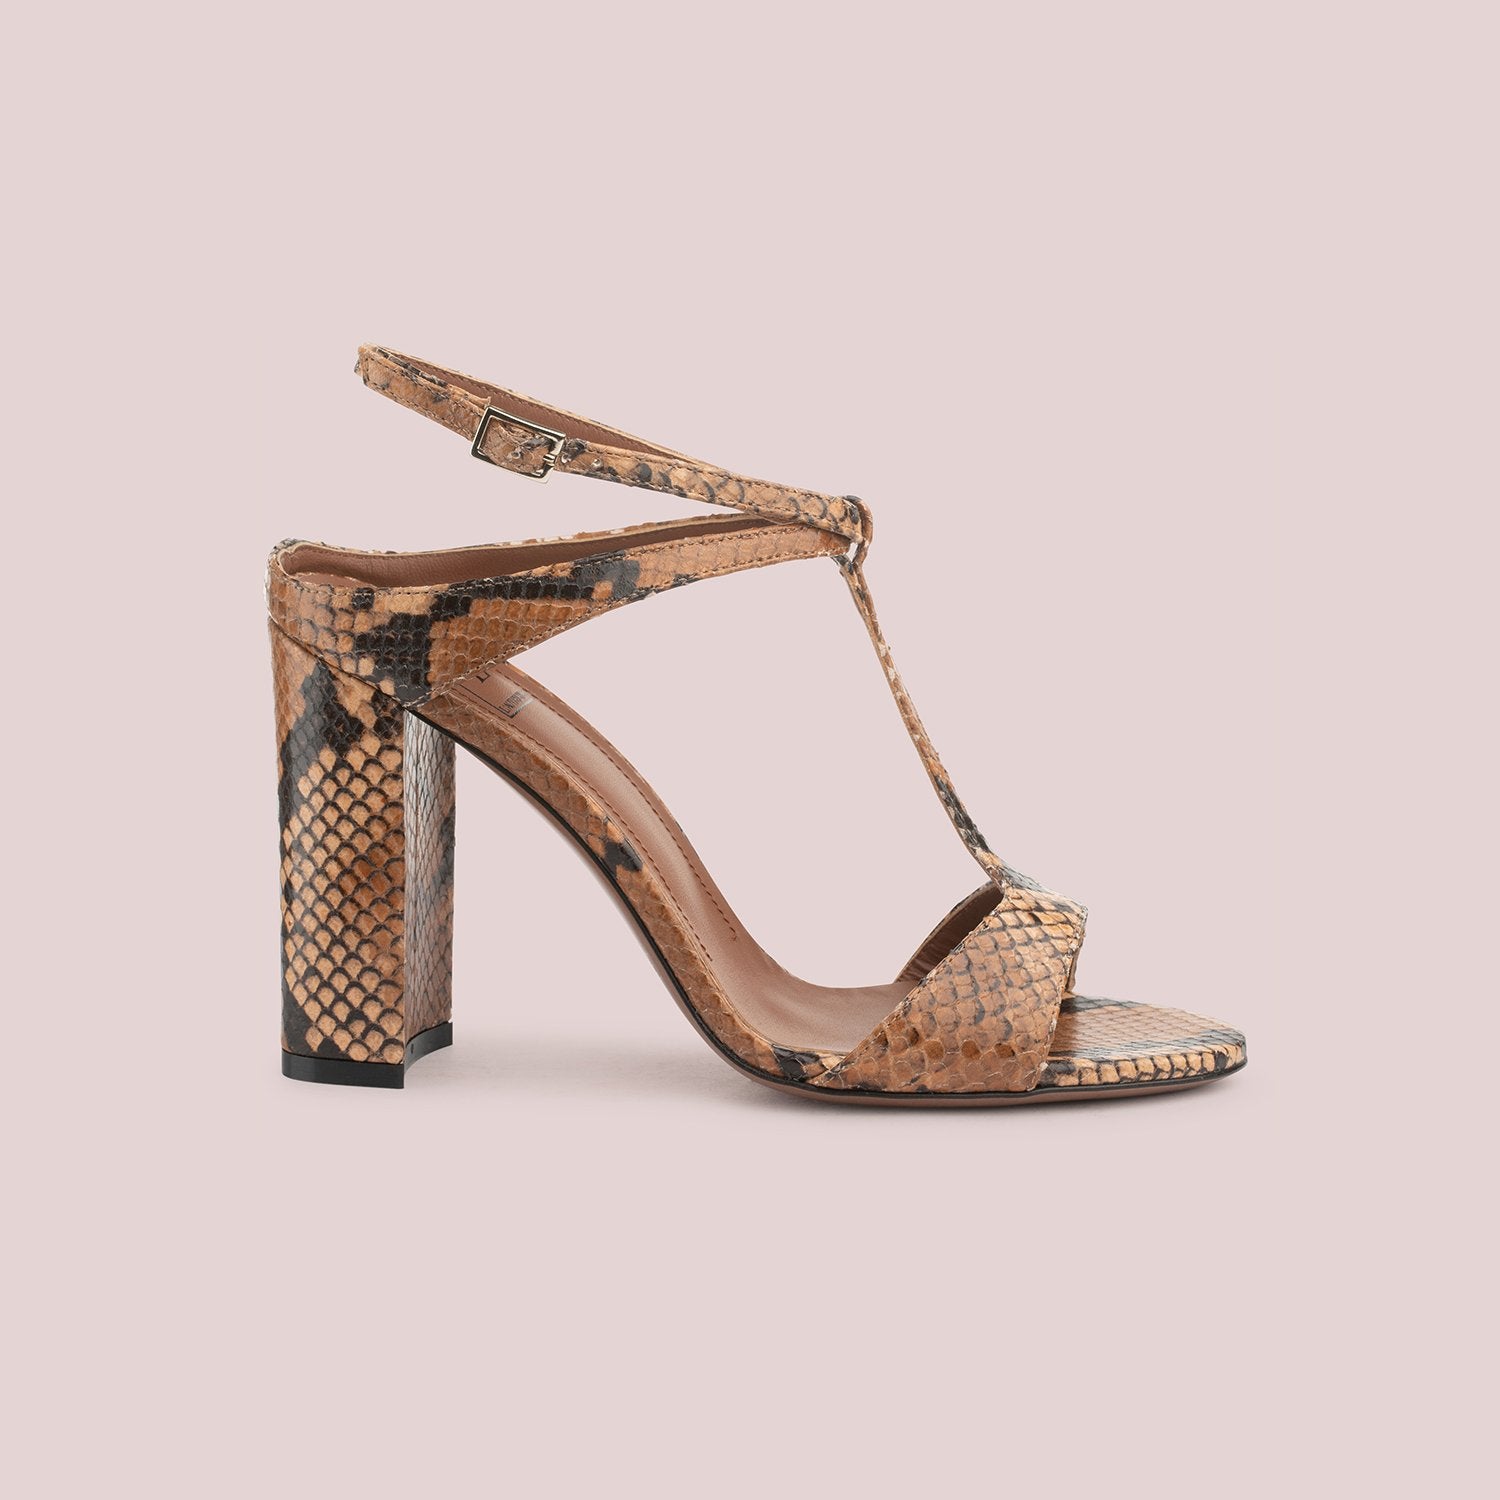 Open Toe Sandals In Cigar Python Print Leather LDL054.95CP29112106 - 4